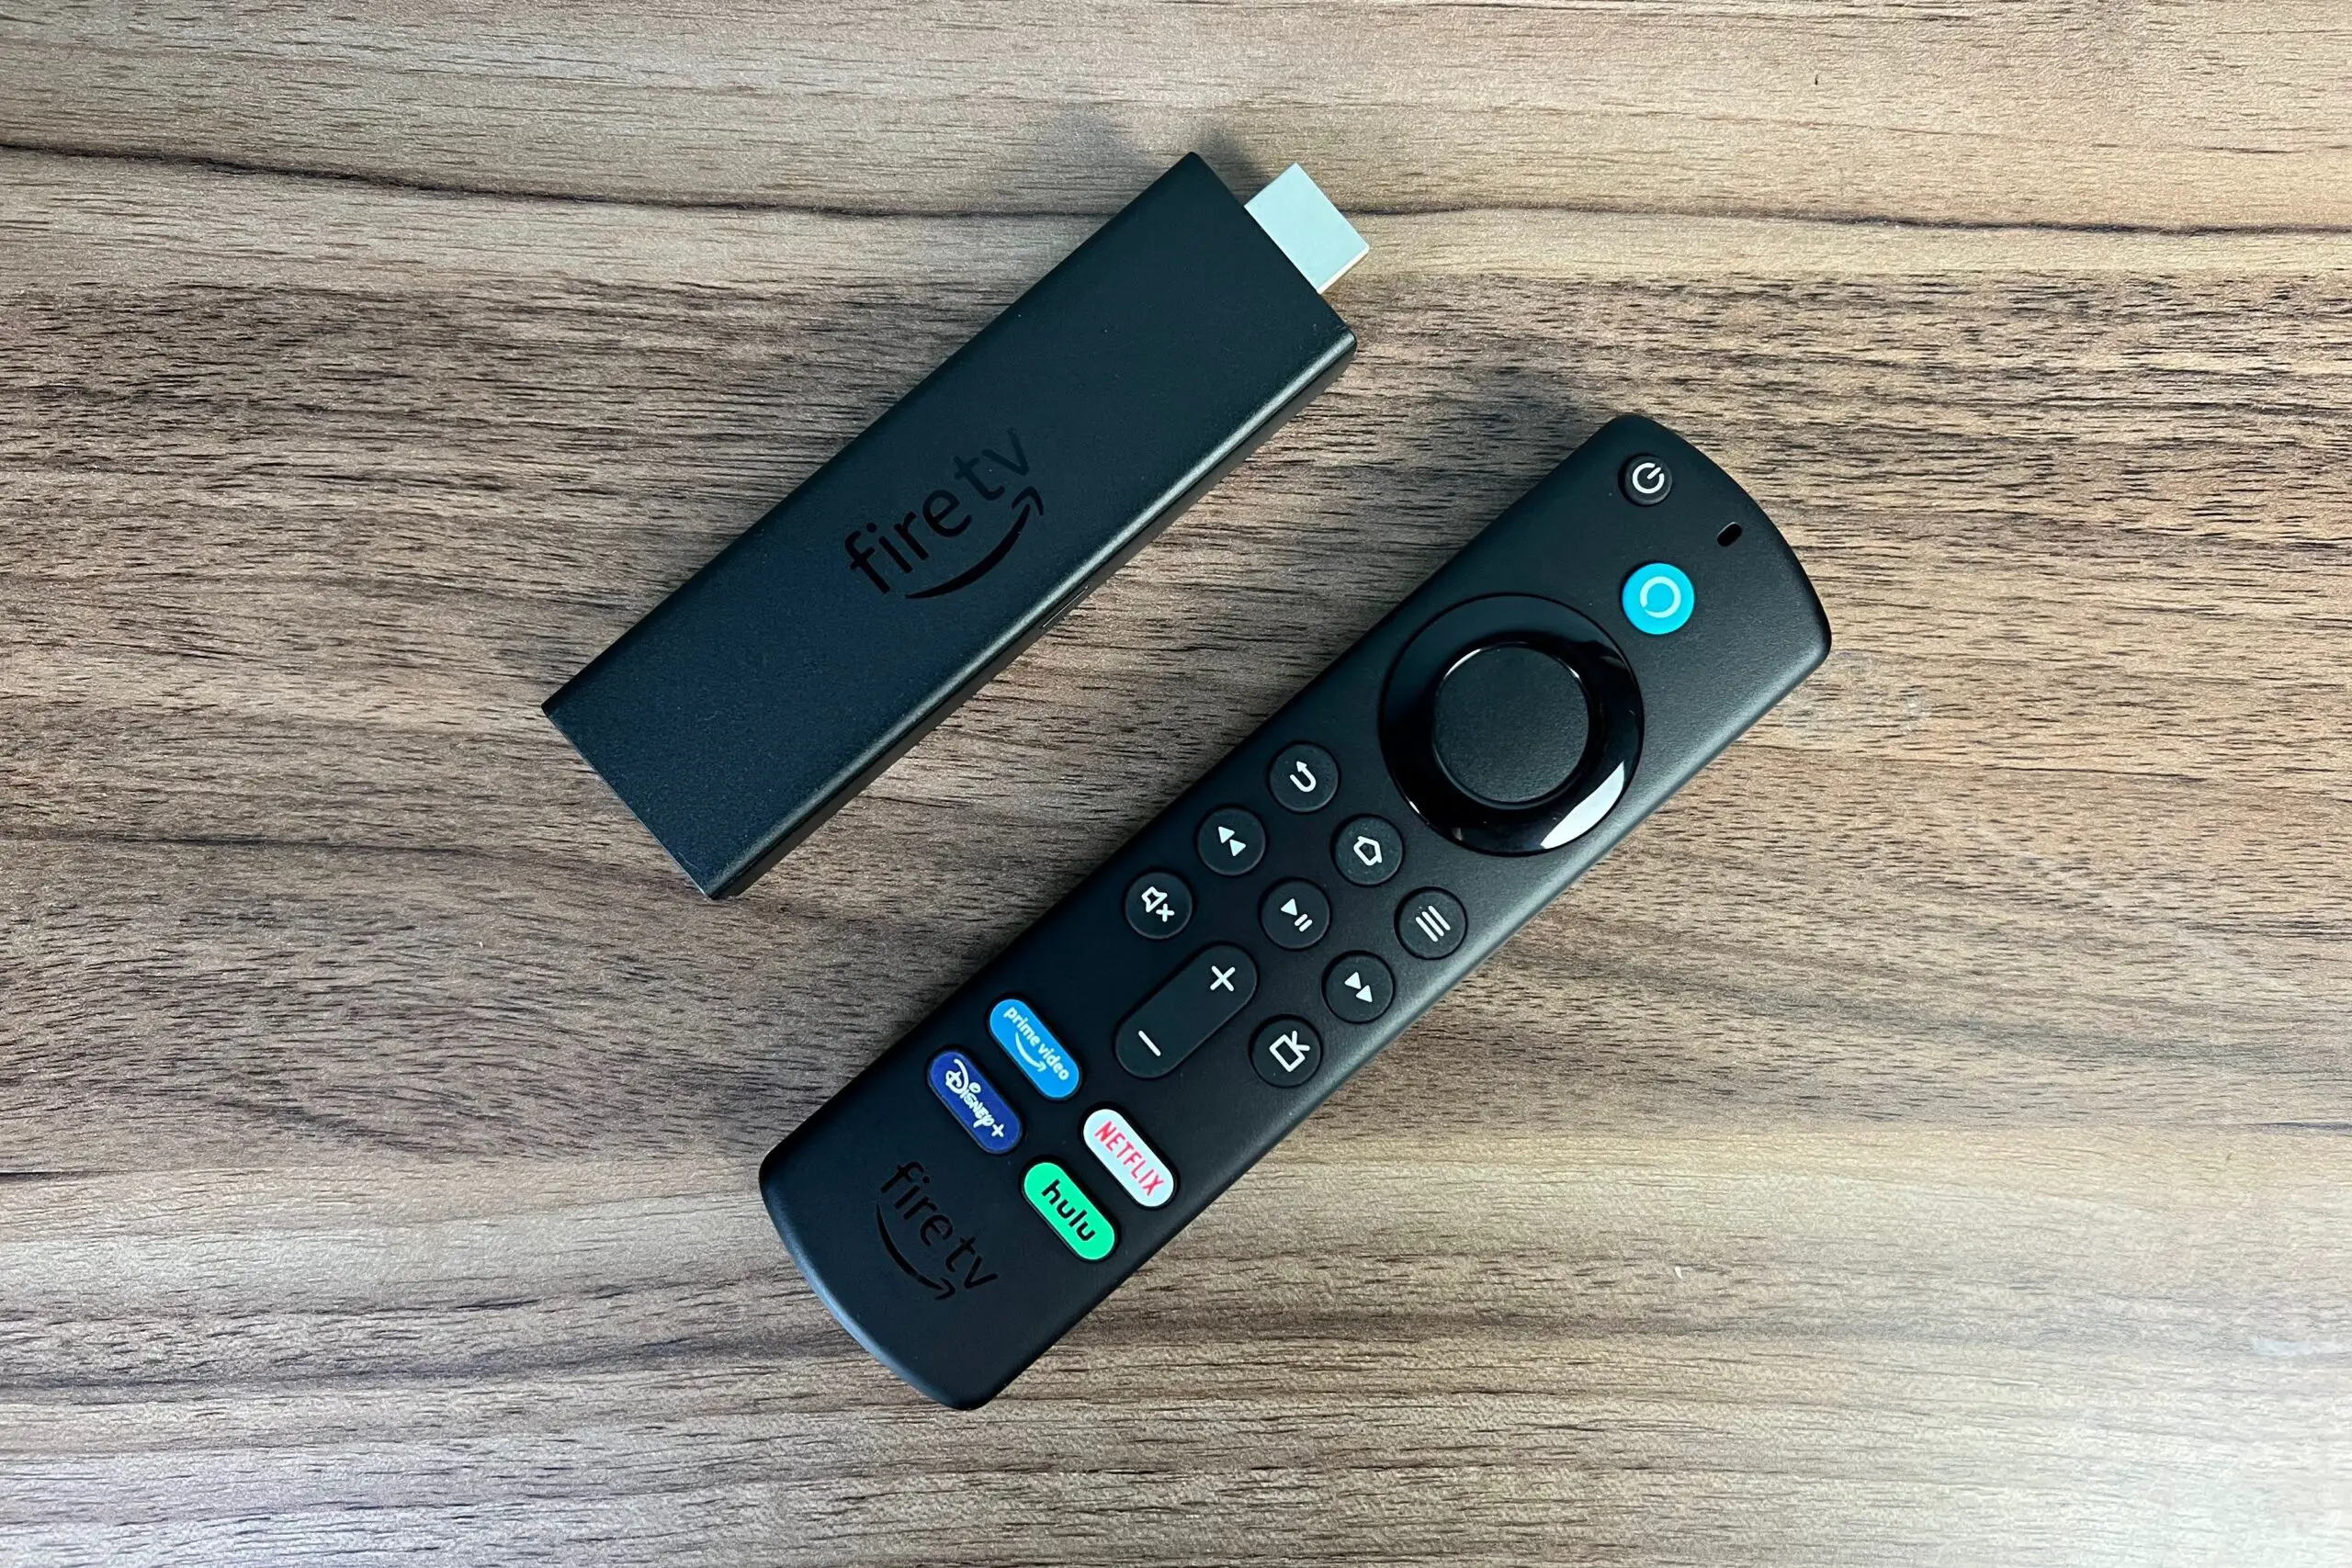 No Remote? Resetting A Fire Tv Stick Without A Remote